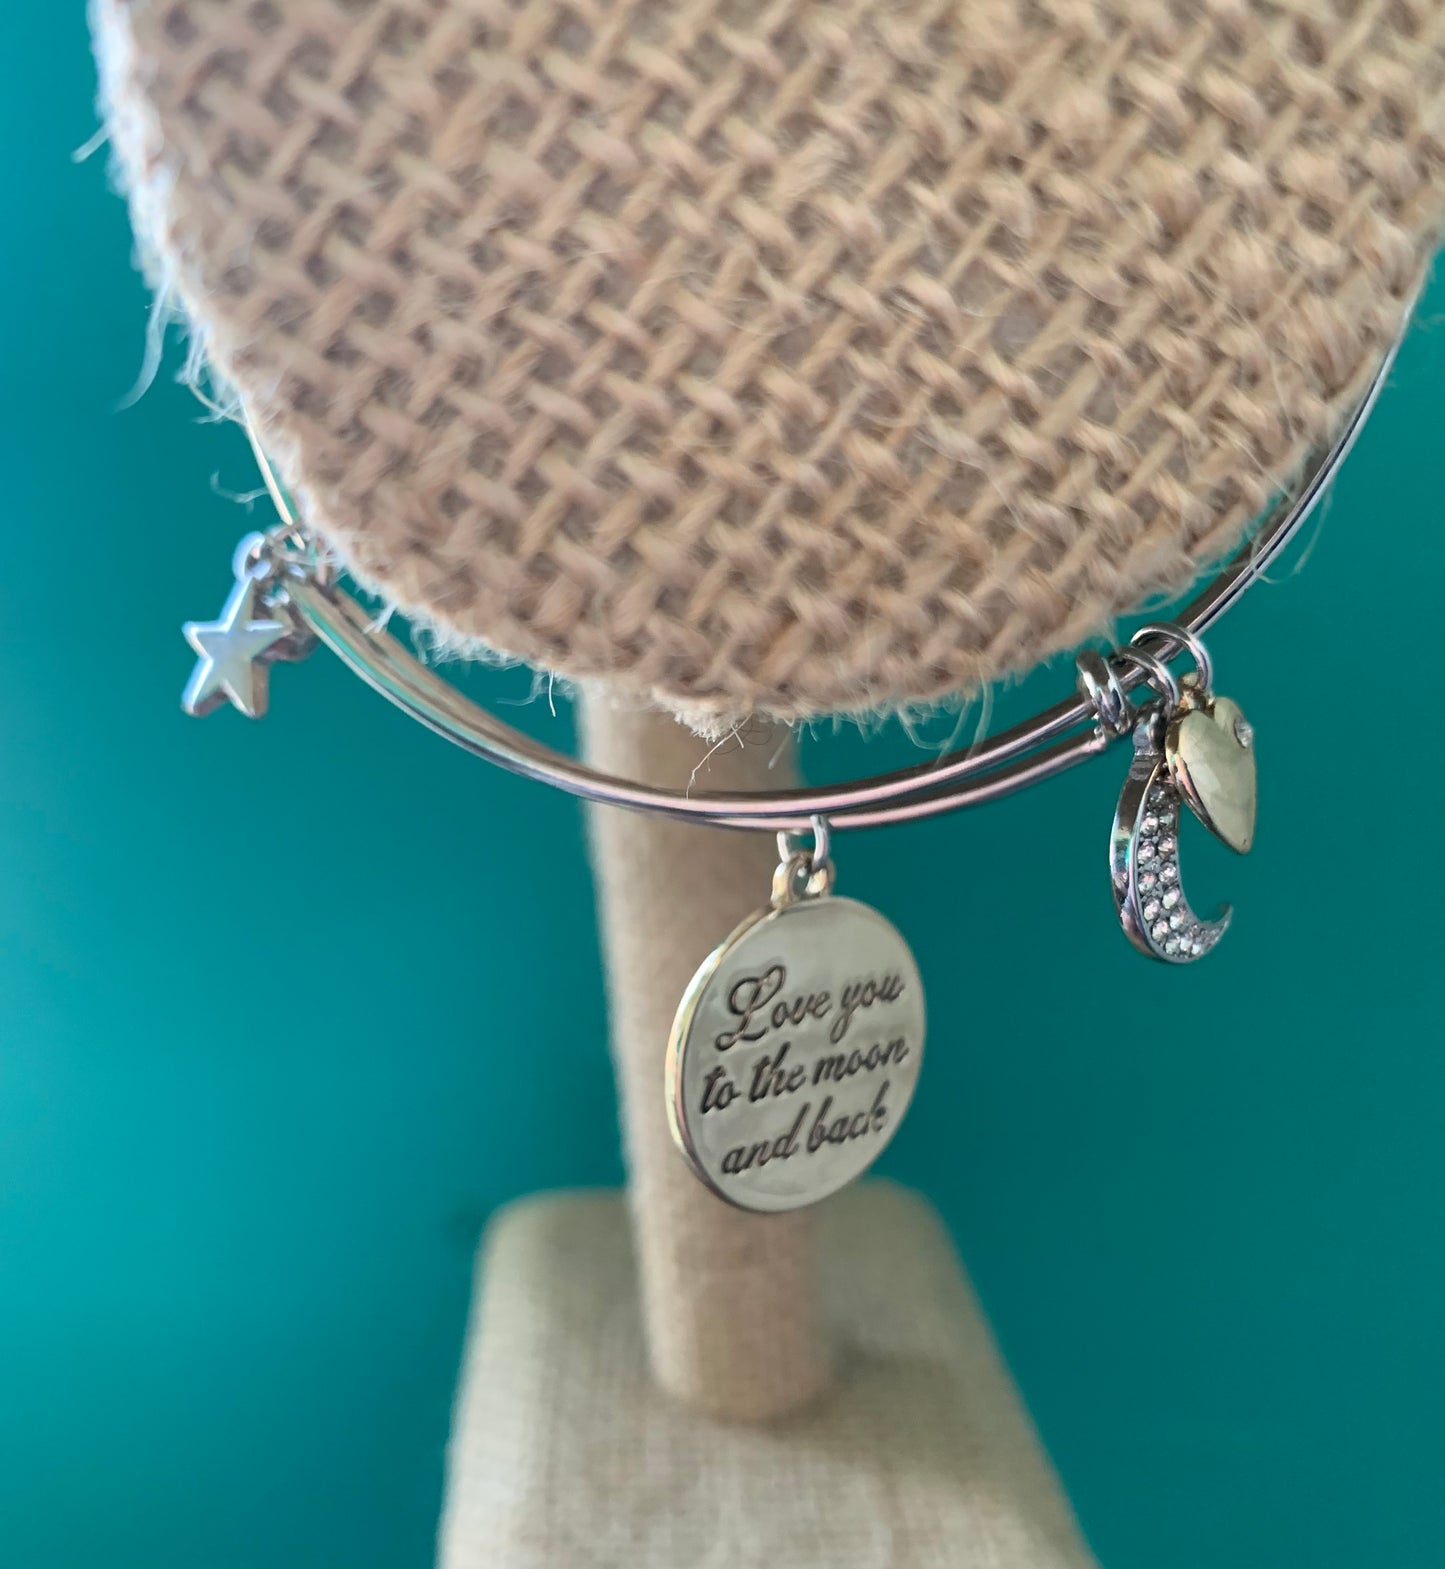 “Love you to the moon and back” dangle charm bracelet